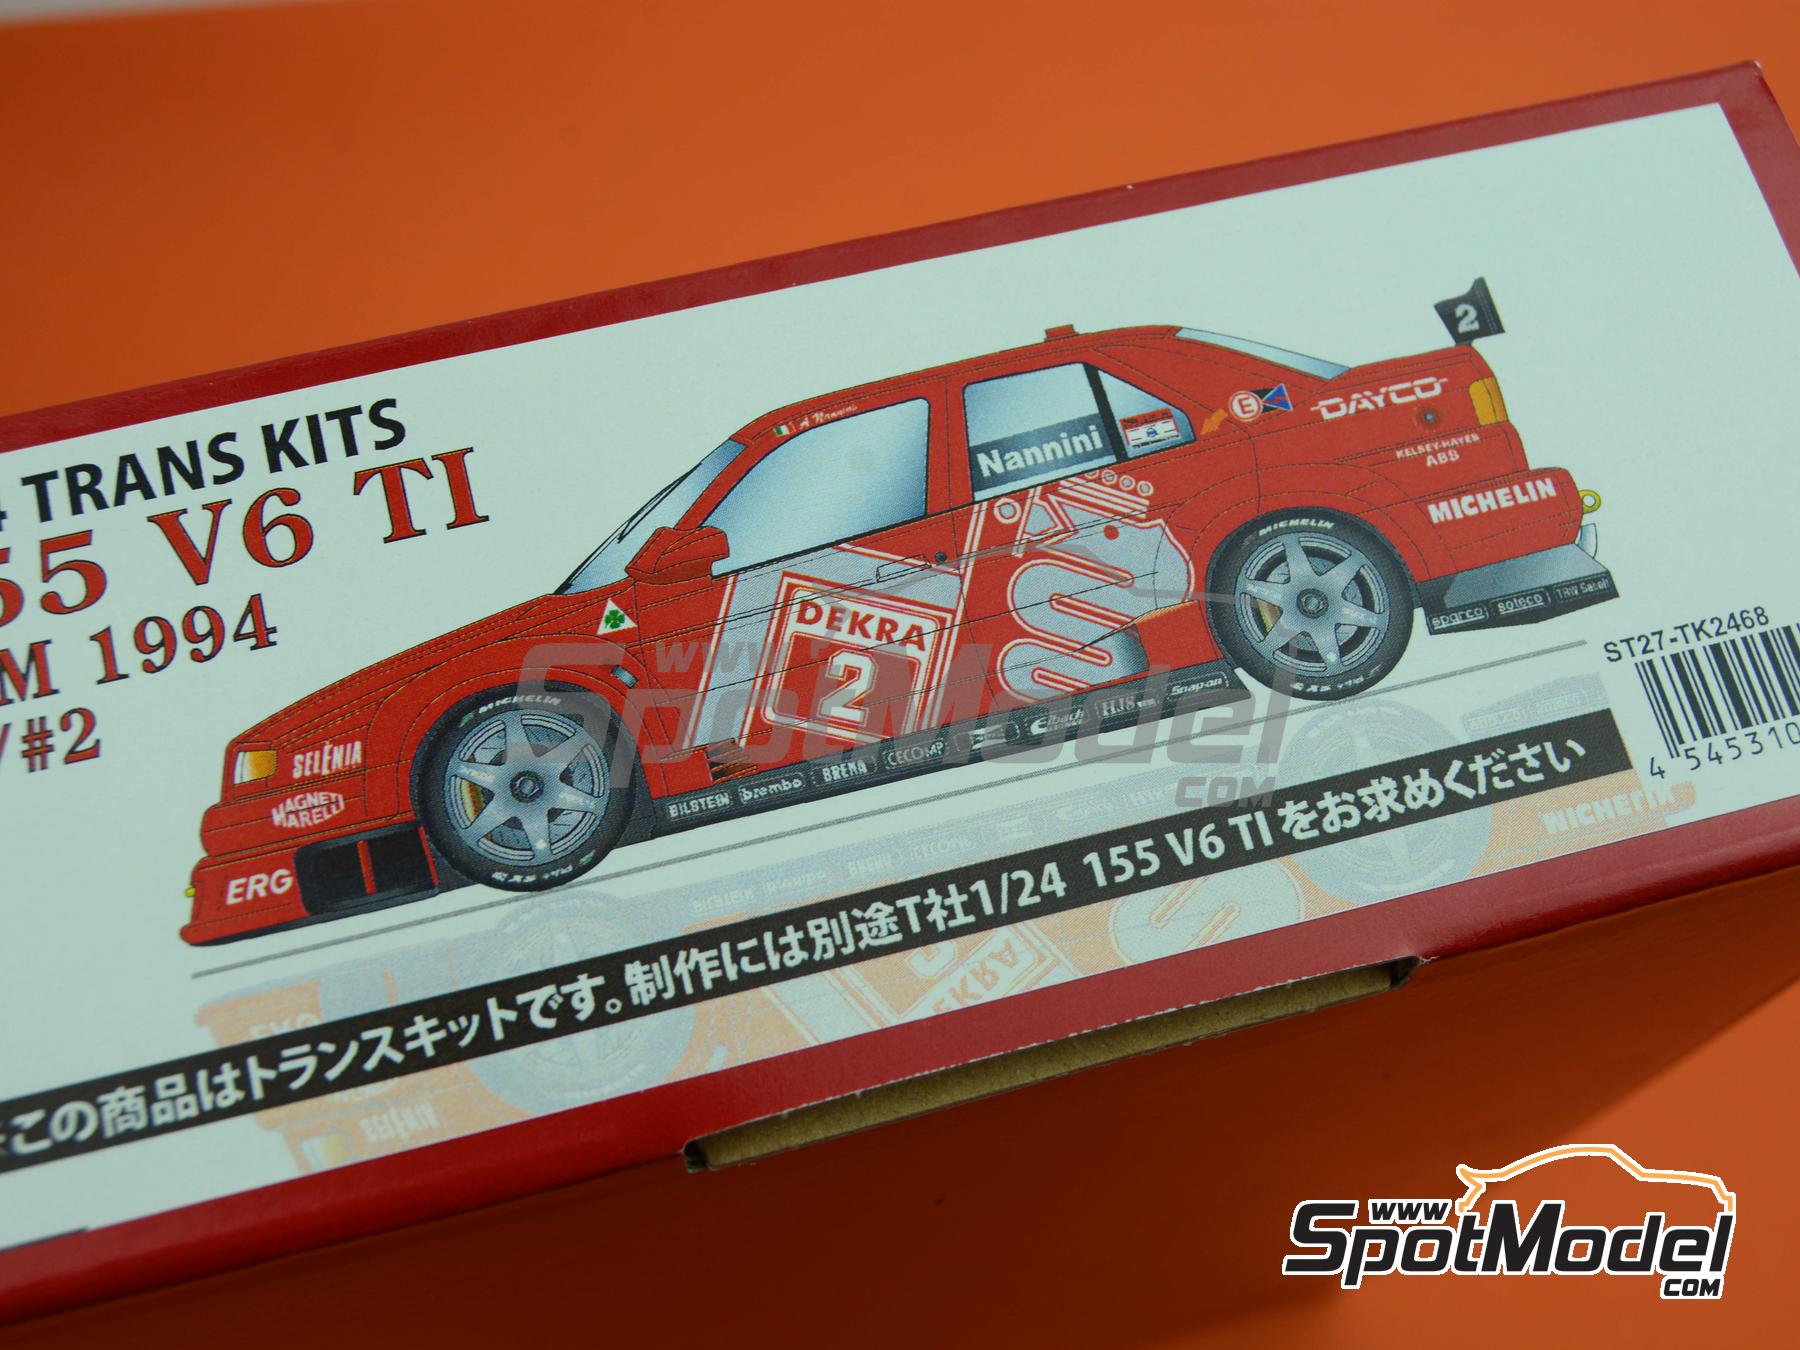 Alfa Romeo 155 V6 TI Alfa Corse Team - DTM 1994. Marking / livery in 1/24  scale manufactured by Studio27 (ref. ST27-TK2468, also 4545310012191 and TK2